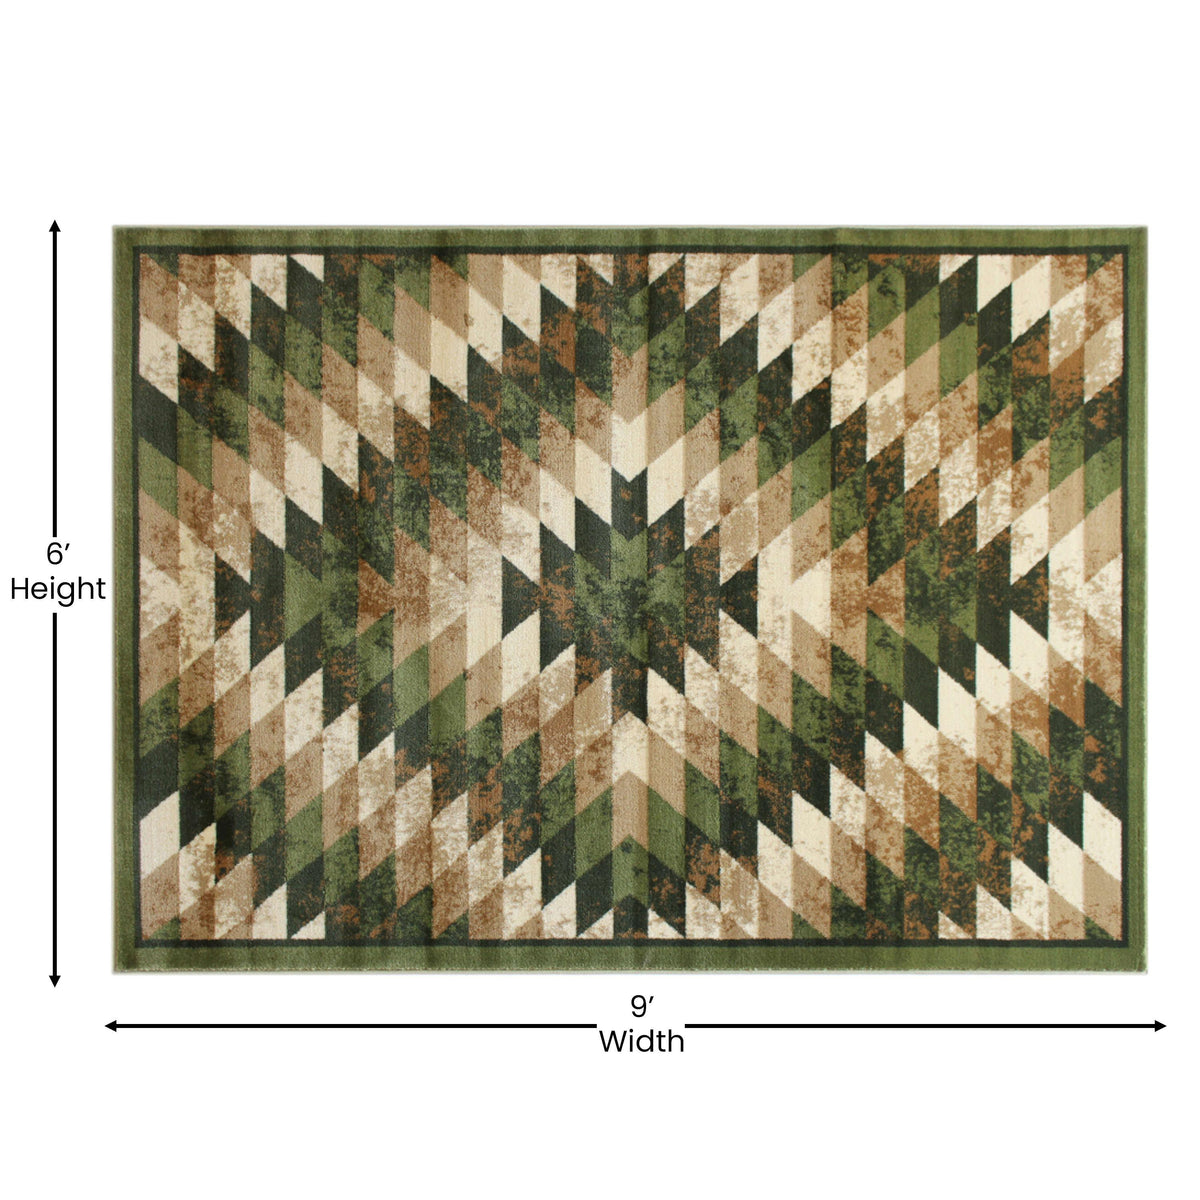 Green,6' x 9' |#| Southwestern Style Diamond Patterned Indoor Area Rug - Green - 6' x 9'